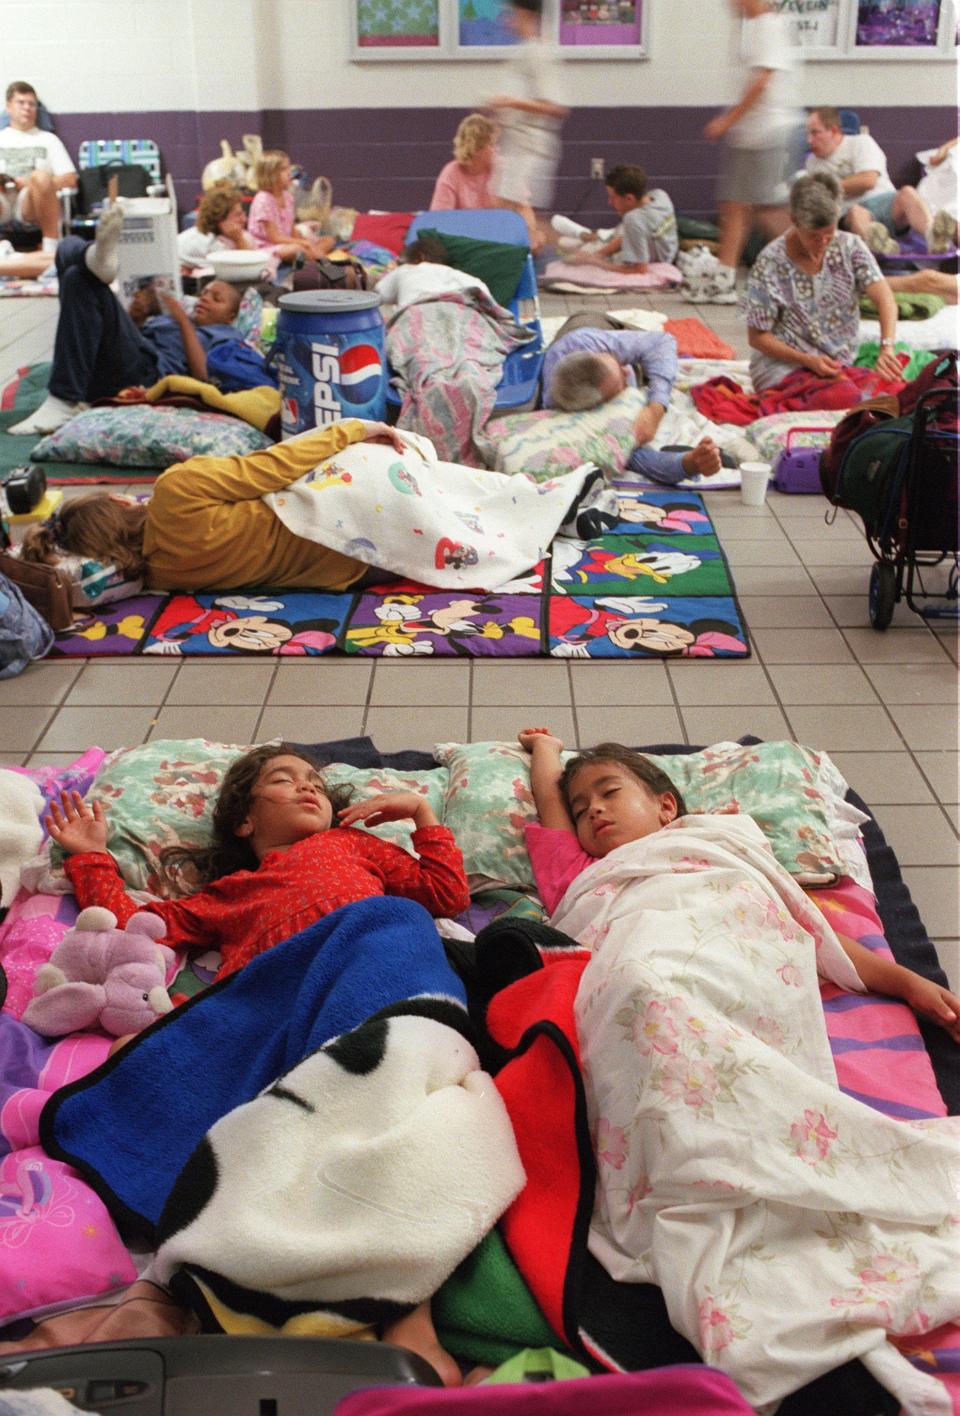 Josephine Kavanagh, left, 5, and her sister Jessica, 7, sleep at the overcrowded hurricane shelter at Landmark Middle School on Kernan Boulevard during Hurricane Floyd in 1999. Their father, Joseph, was assigned to the USS Hue City, which was deployed to ride out Hurricane Floyd.